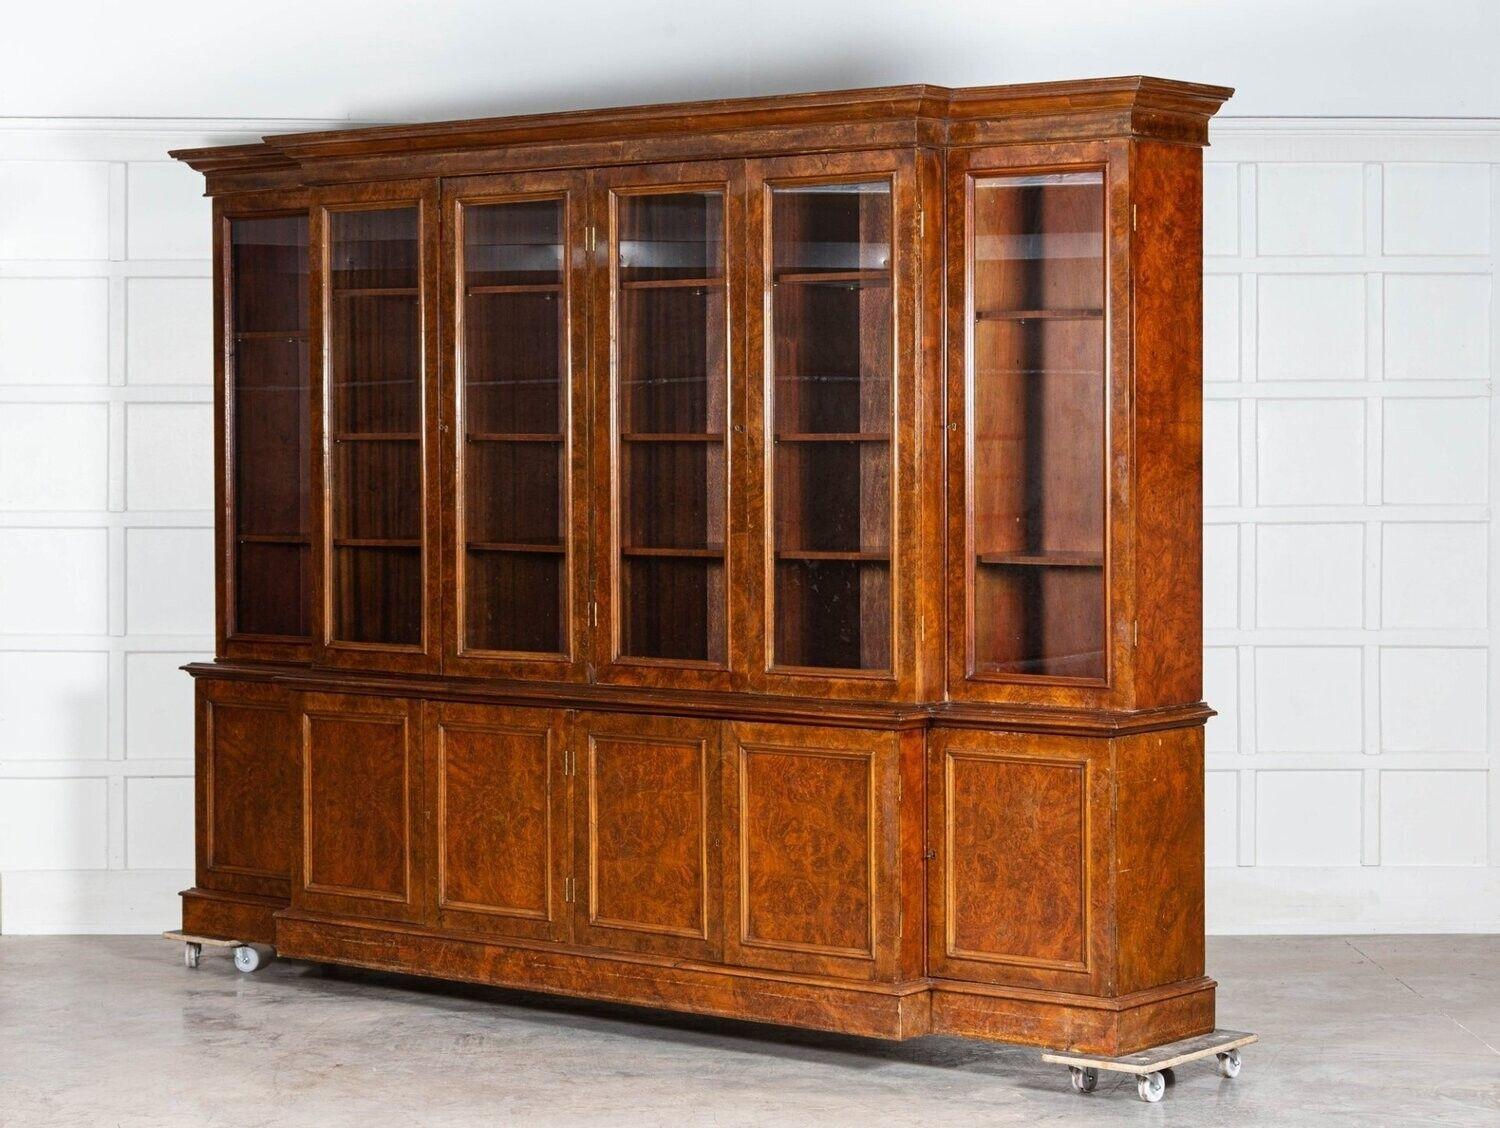 Early 20th Century Monumental English Burr Walnut Breakfront Bookcase For Sale